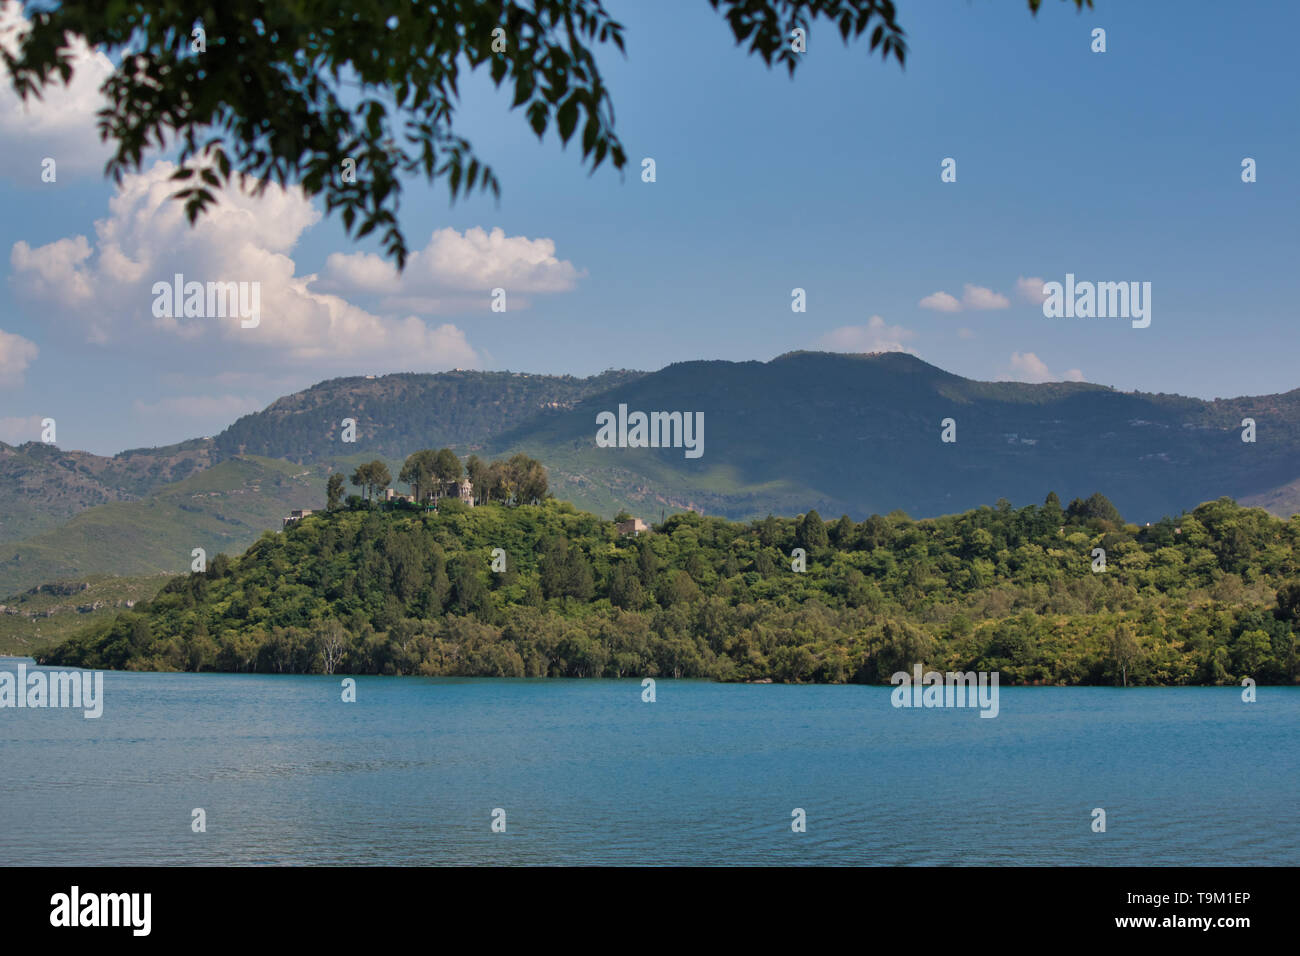 Khanpur, Pakistan - May 2019: A view of a lake next to the mountains Stock Photo